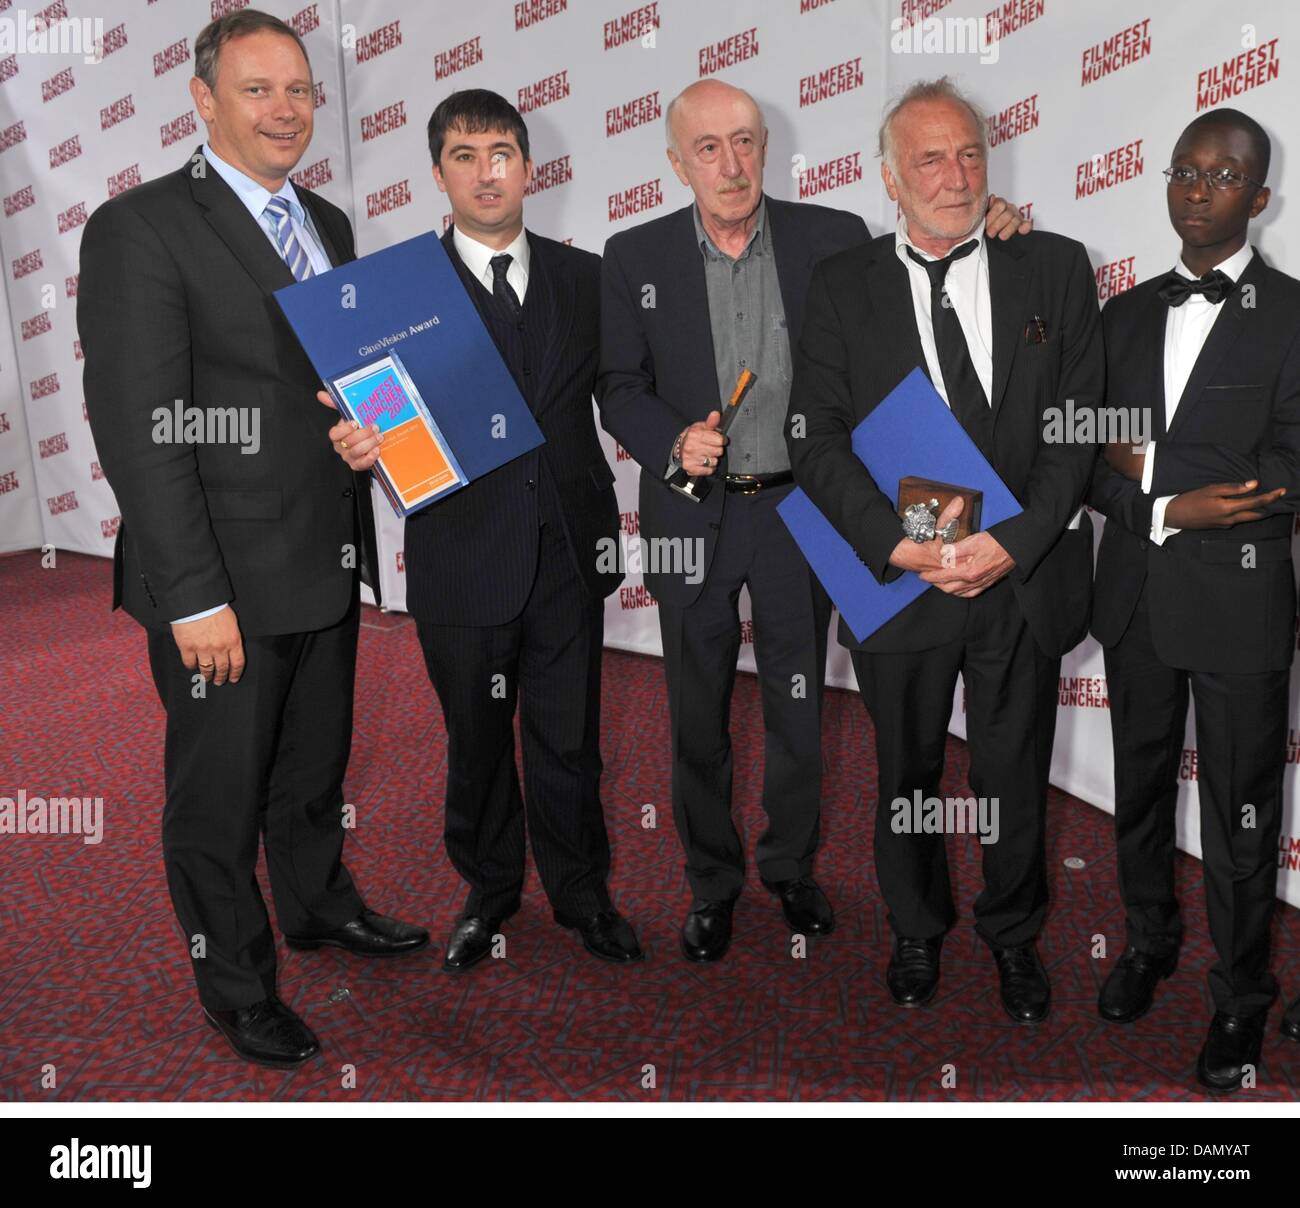 The Bavarian Finance Georg Fahrenschon (L-R), the British actor Paul Popplewell, the Georgian director Otar Iosseliani, the French actor Andre Wilms and the actor Blondin Miguel pose after the awards ceremony of the CineVision Award in Munich, Germany, 01 July 2011. The awarding took place within the Film Festival Munich. Photo: Felix Hoerhager Stock Photo